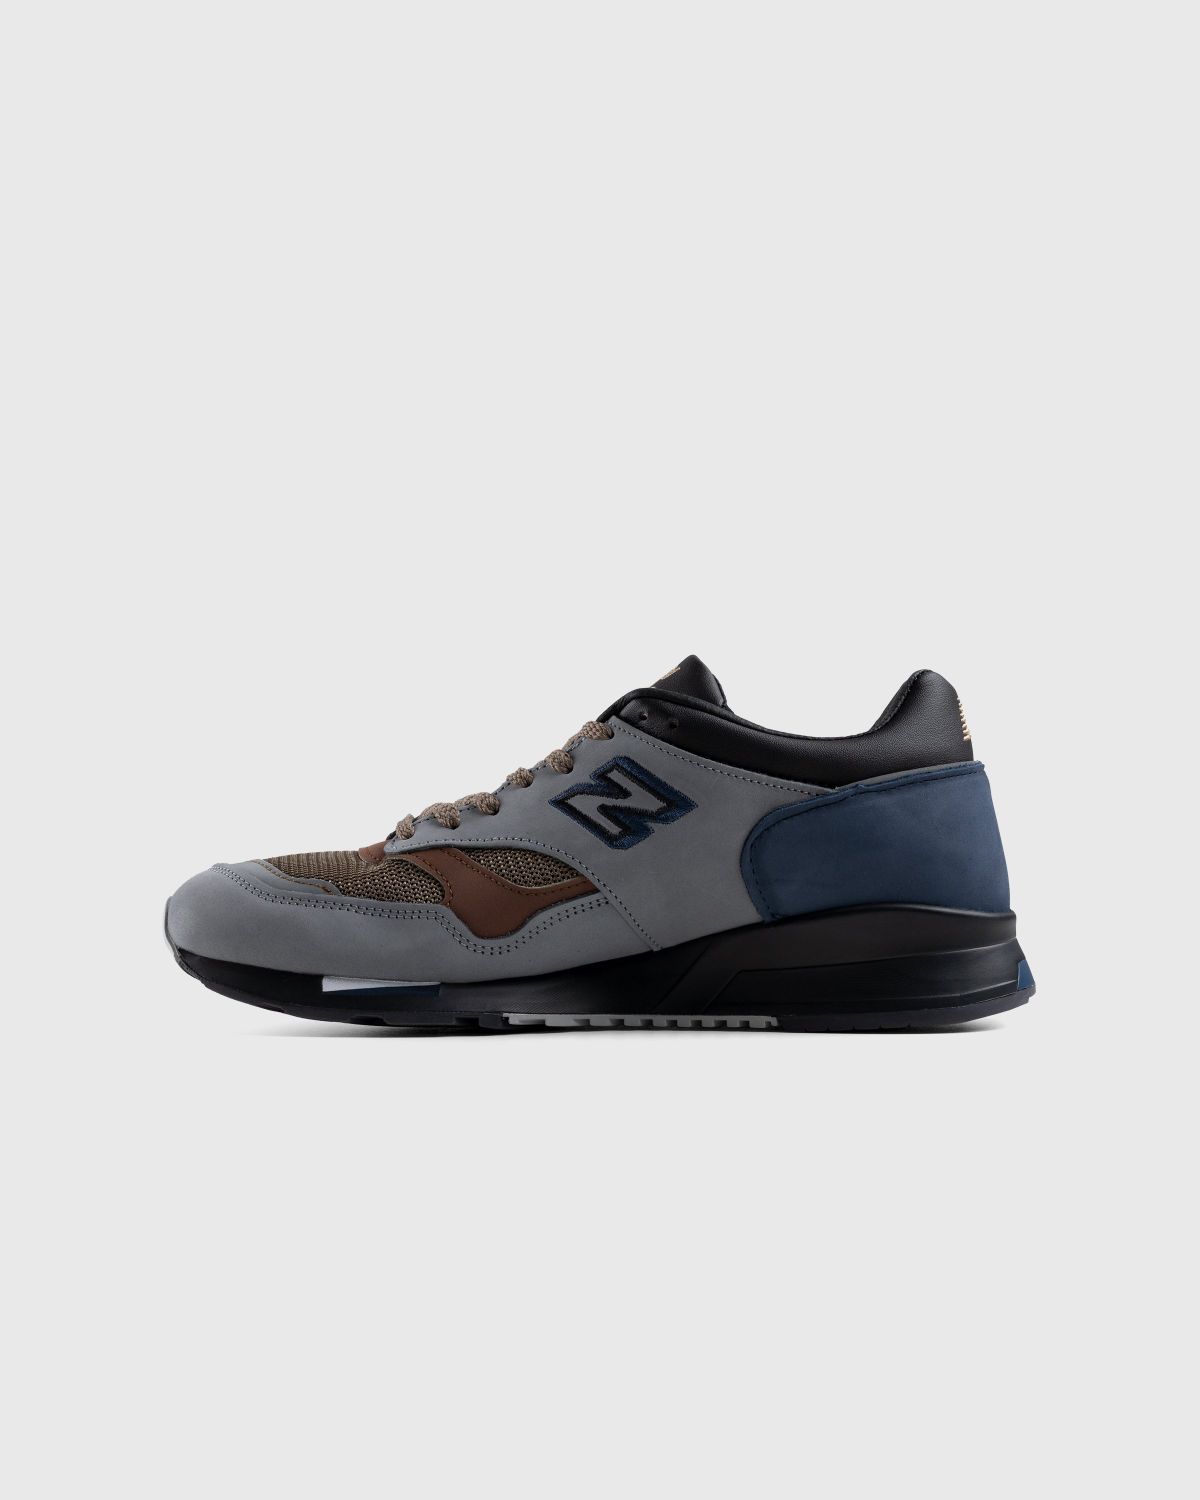 New Balance – M1500INV Grey/Black - Low Top Sneakers - Grey - Image 2